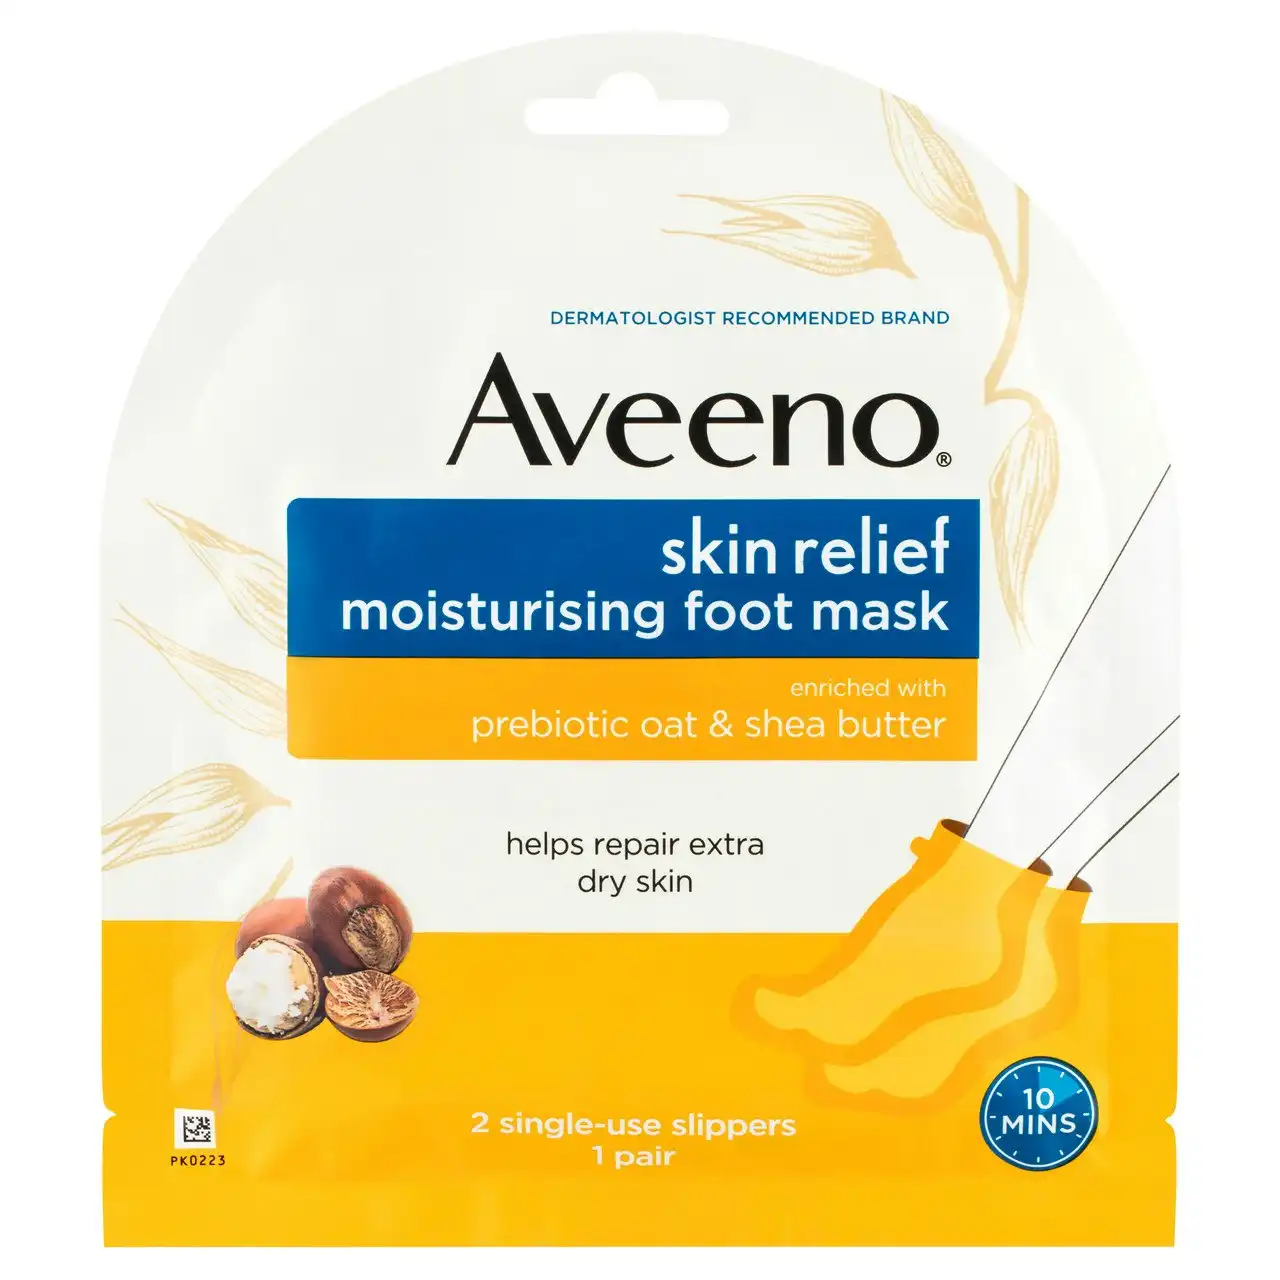 Aveeno Skin Relief Essential Moisturising Shea Butter Fragrance Free Foot Mask Restore & Nourish Extra Dry Skin 1 Pack